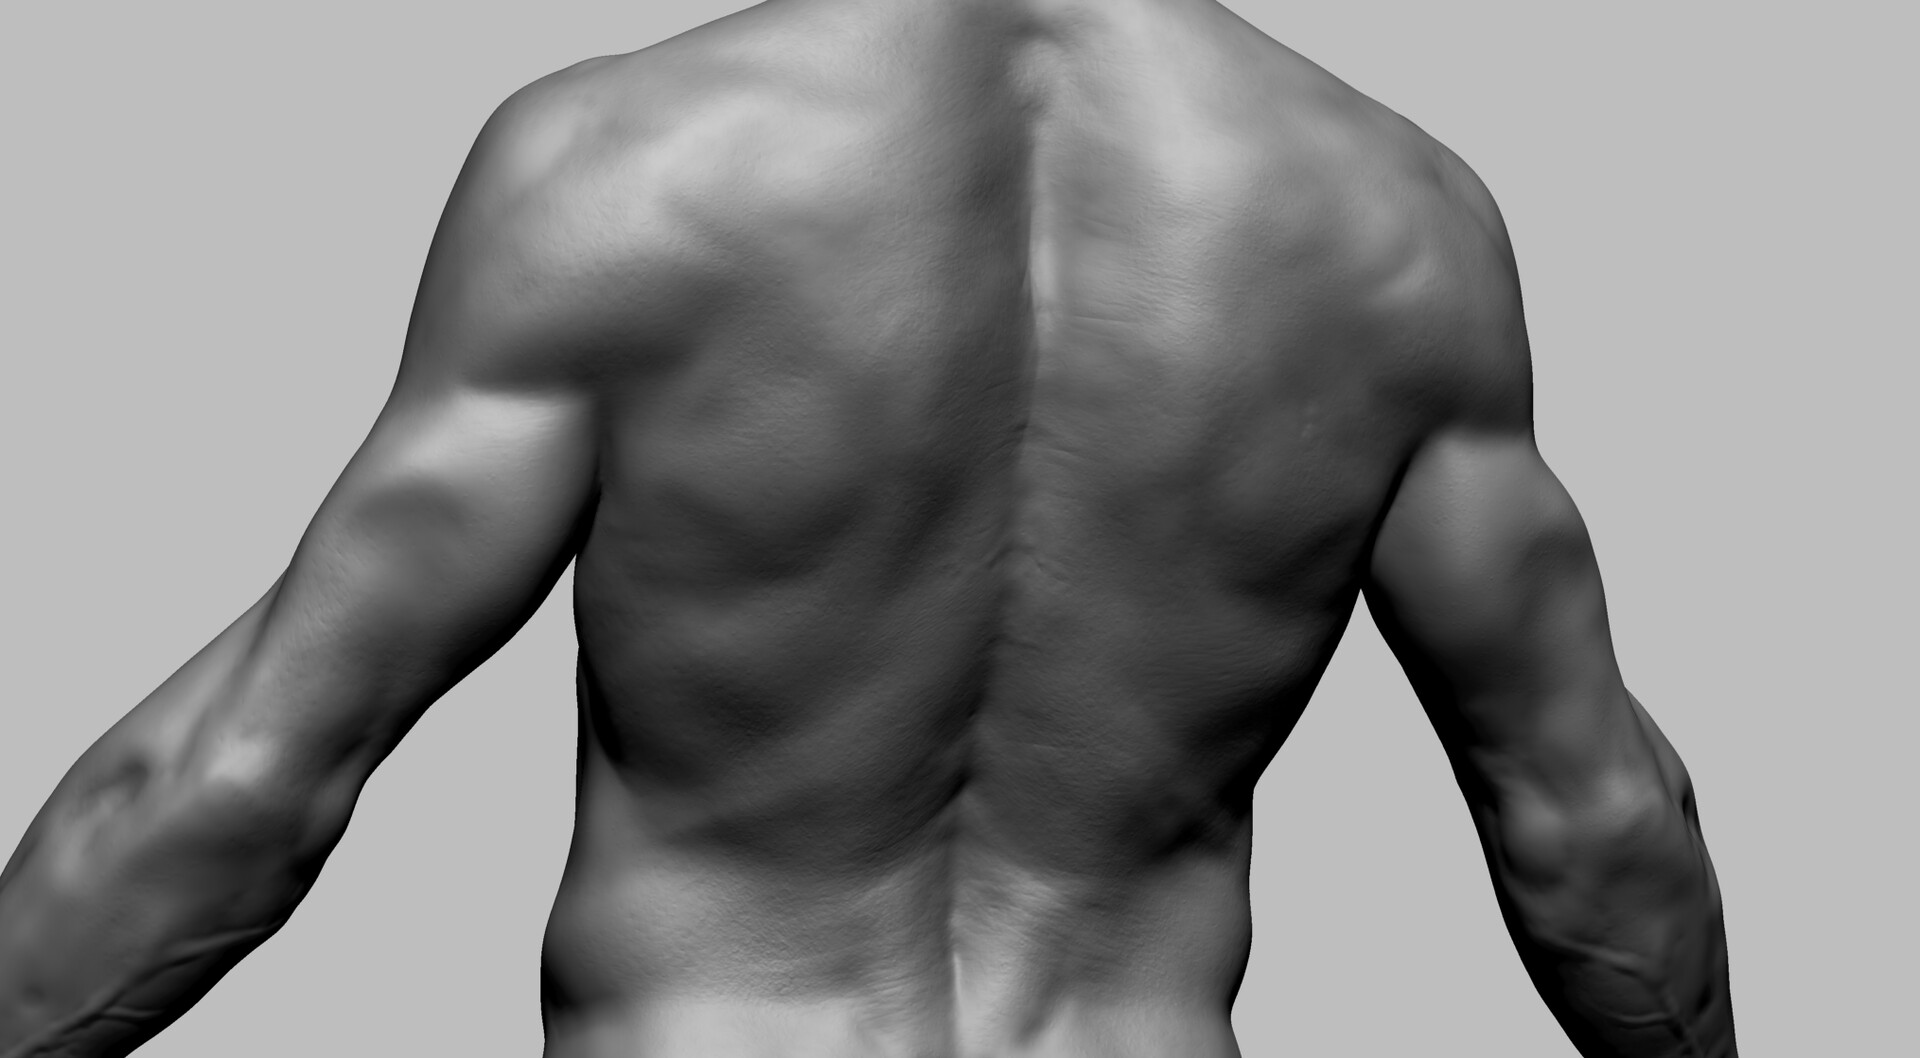 ArtStation - ZBrush Anatomy Tutorial: Sculpting The Back And Torso Muscles